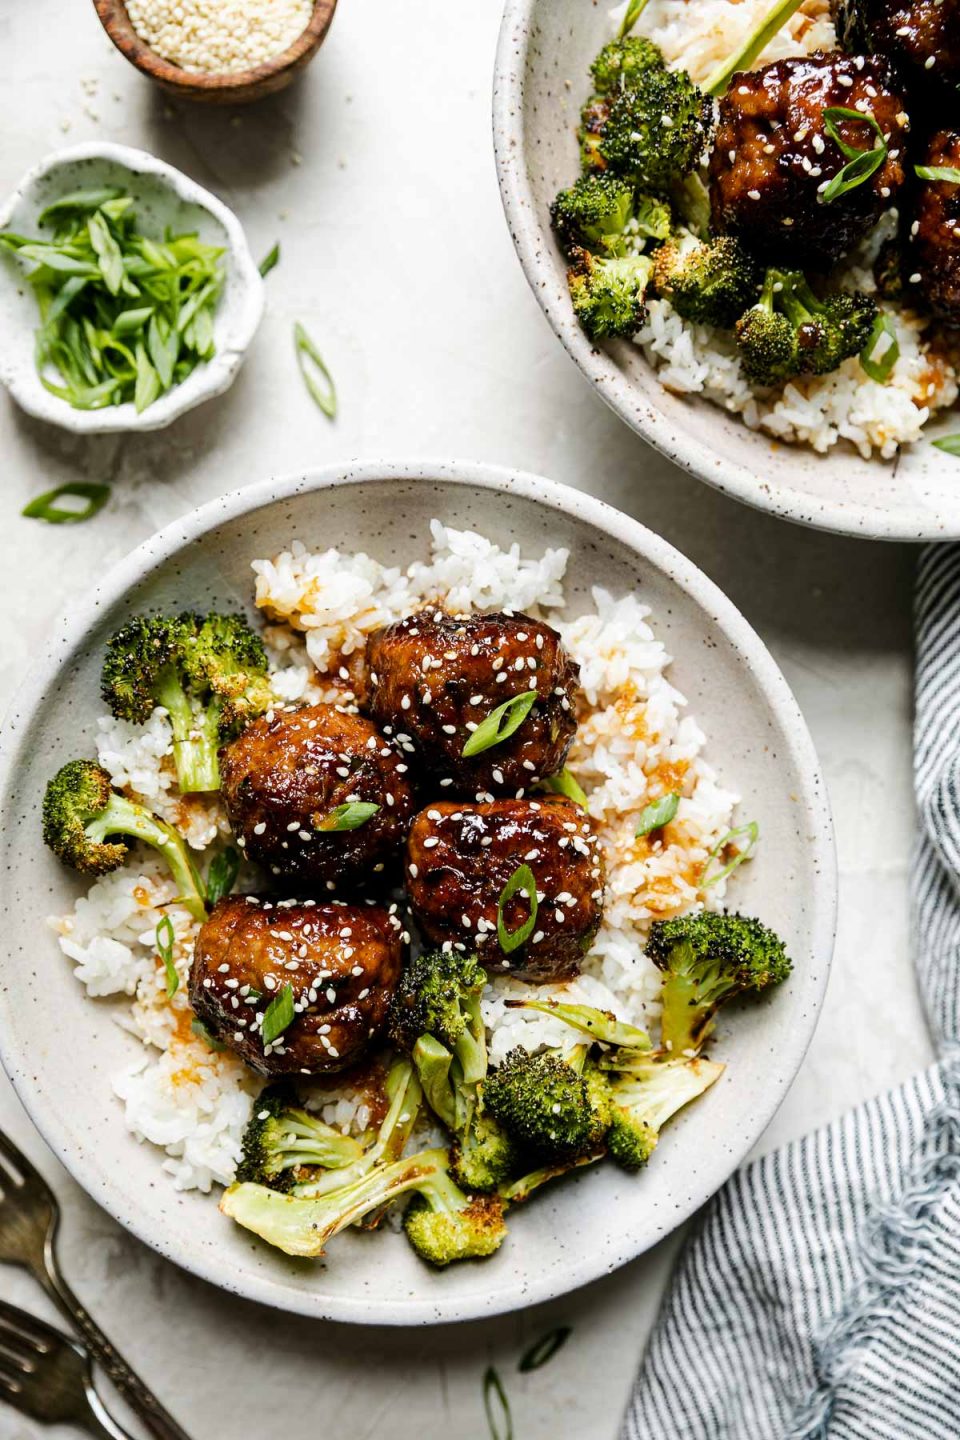 Soy-glazed ginger turkey meatballs plated in large ceramic bowls over rice with roasted broccoli. The meatballs are garnished with sesame seeds & sliced green onions. The bowls sit atop a creamy cement surface surrounded by a gray striped linen napkin, forks, a small wooden bowl filled with sesame seeds & a small ceramic bowl of sliced green onions.